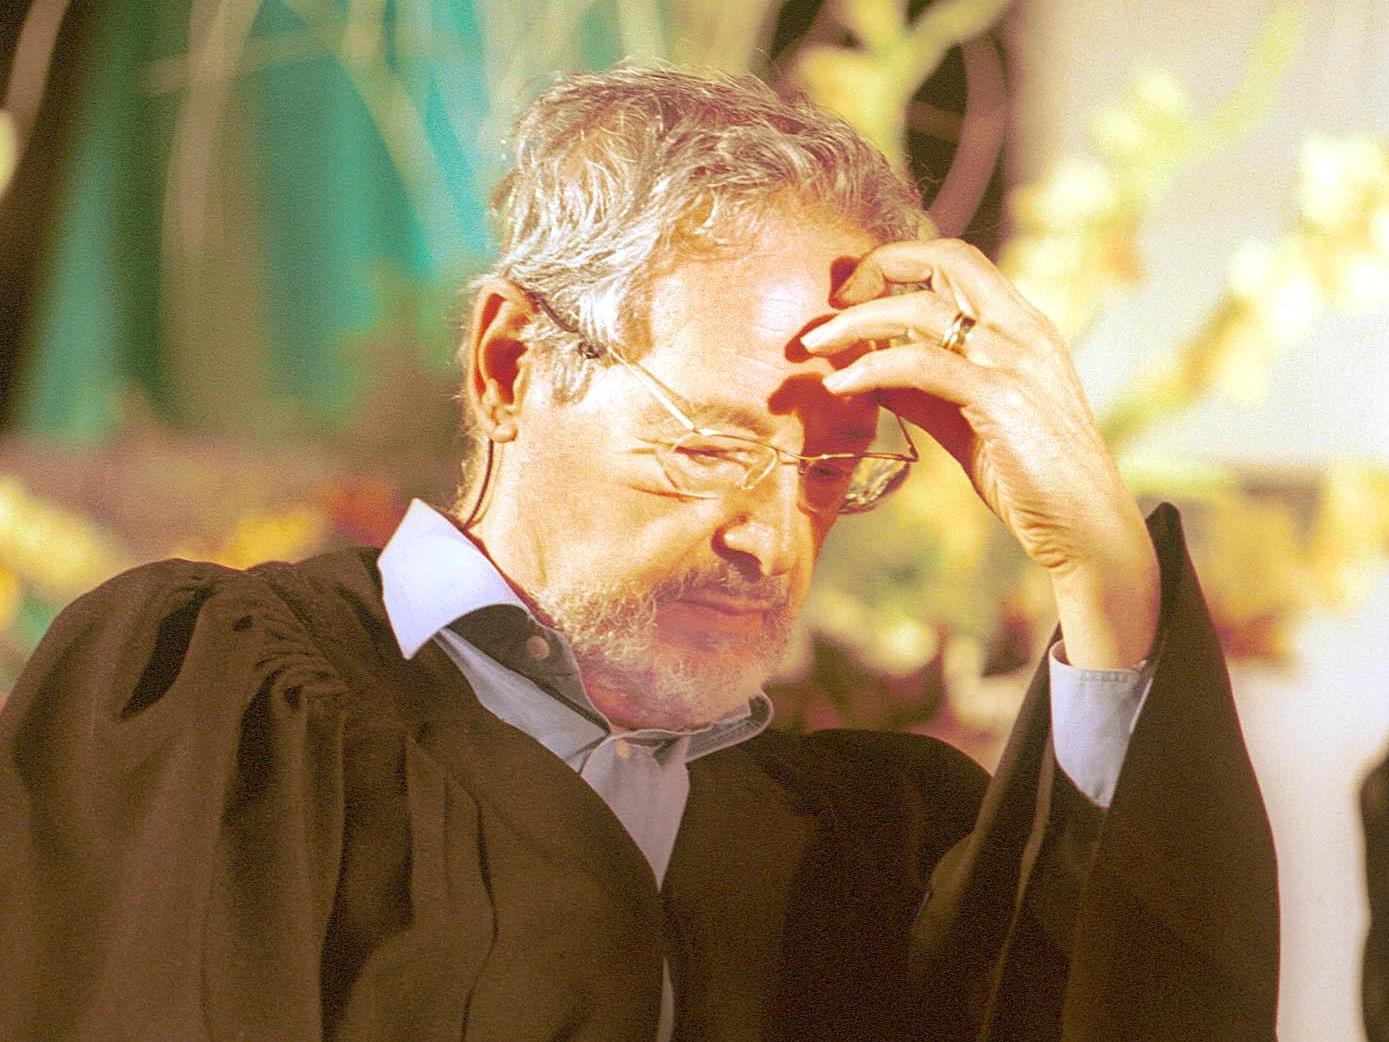 Receiving an honorary doctorate at Ben Gurion University of the Negev in 1999